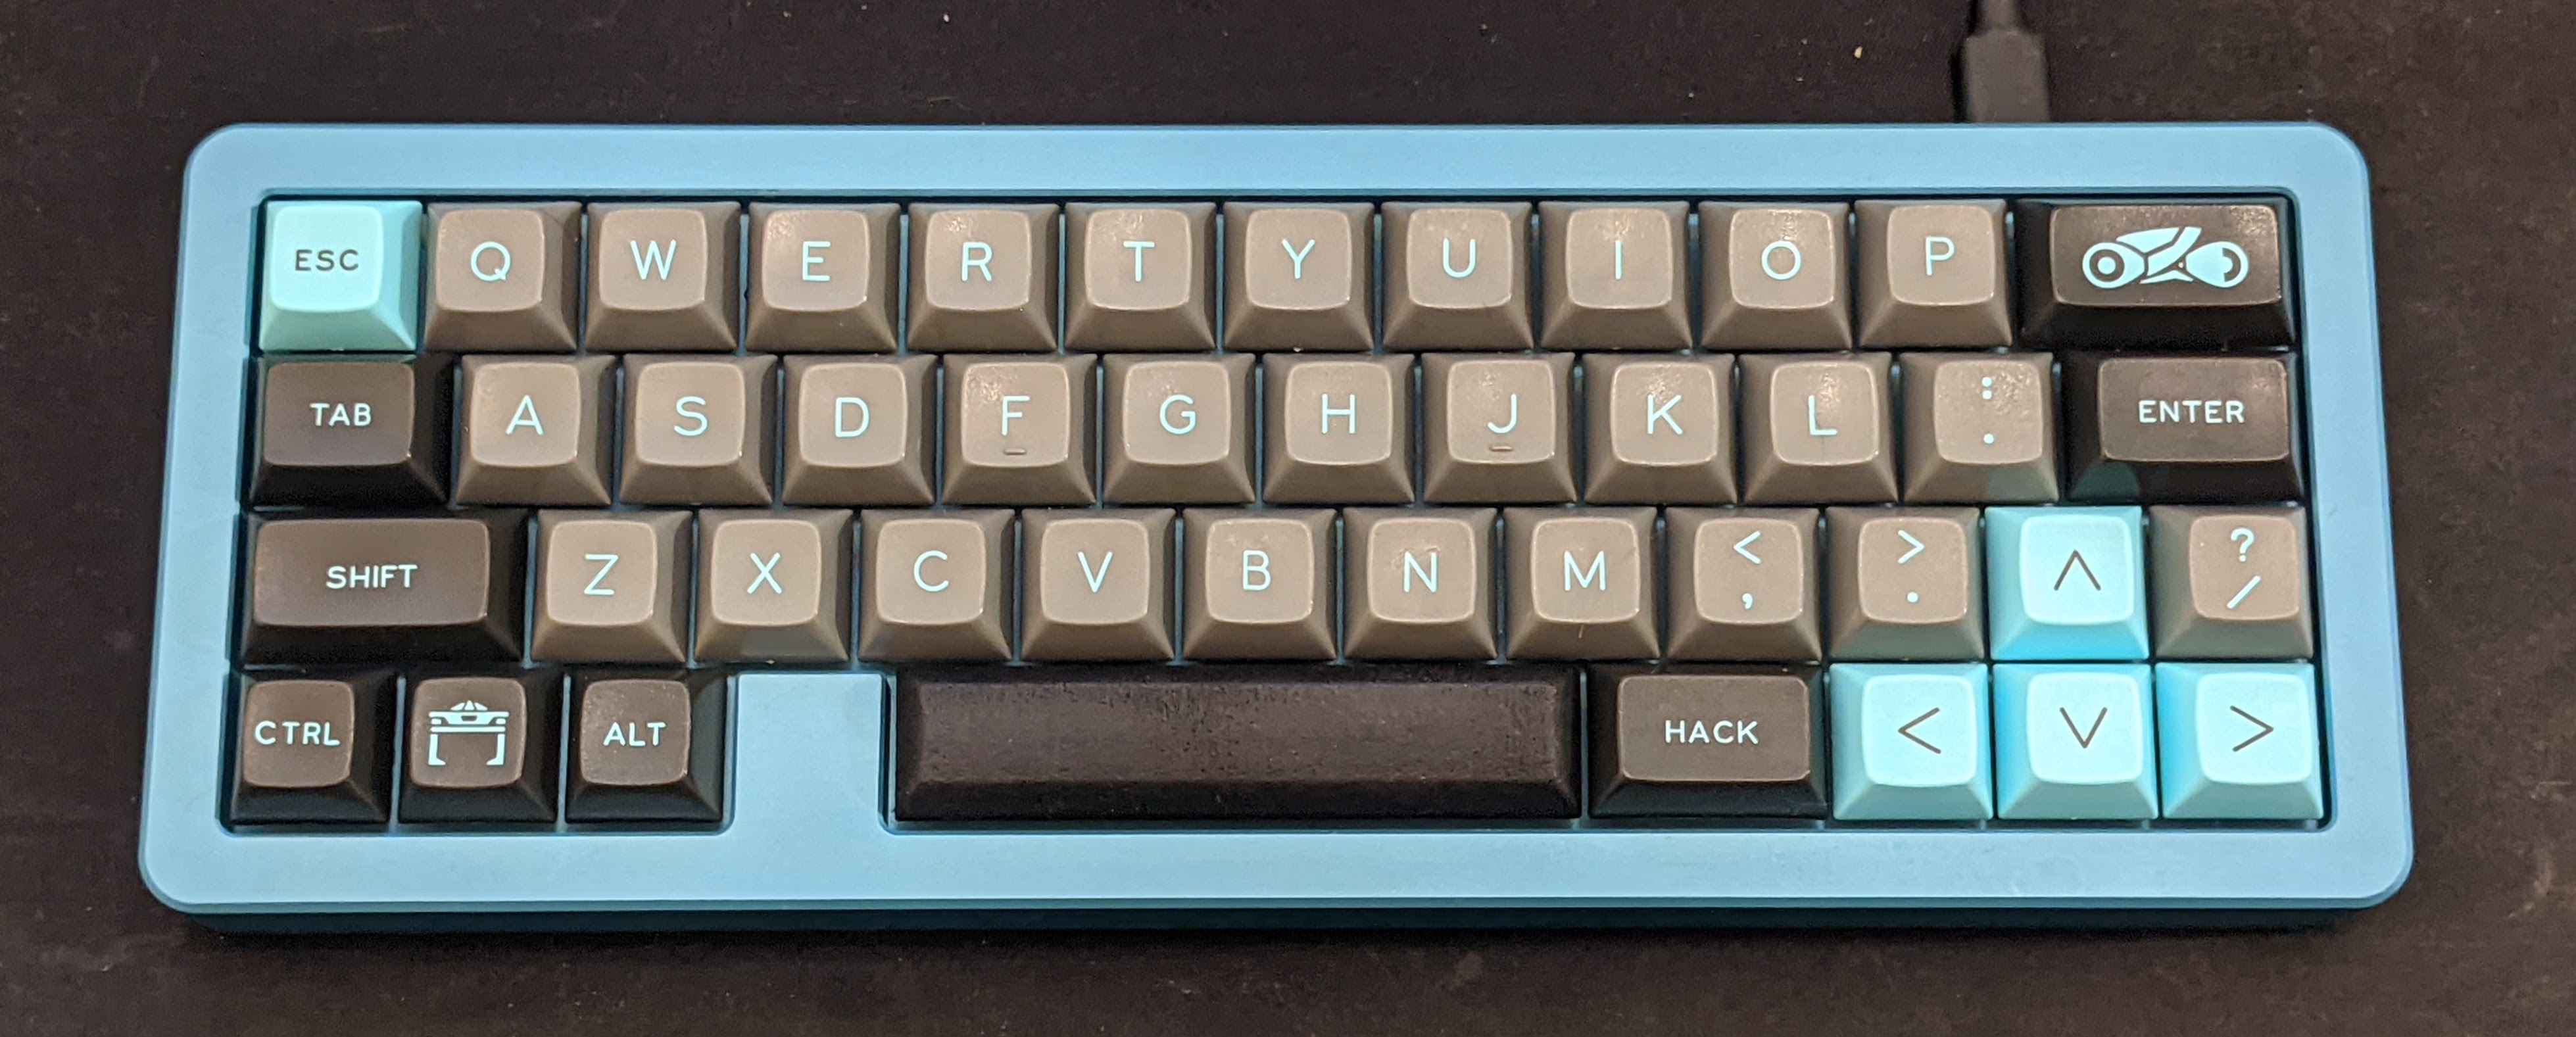 4.25u HuB spacebar with DSA LightCycle R1 and R2 keycaps on a Minivan in an MHKB S-Type in Fabulous Teal